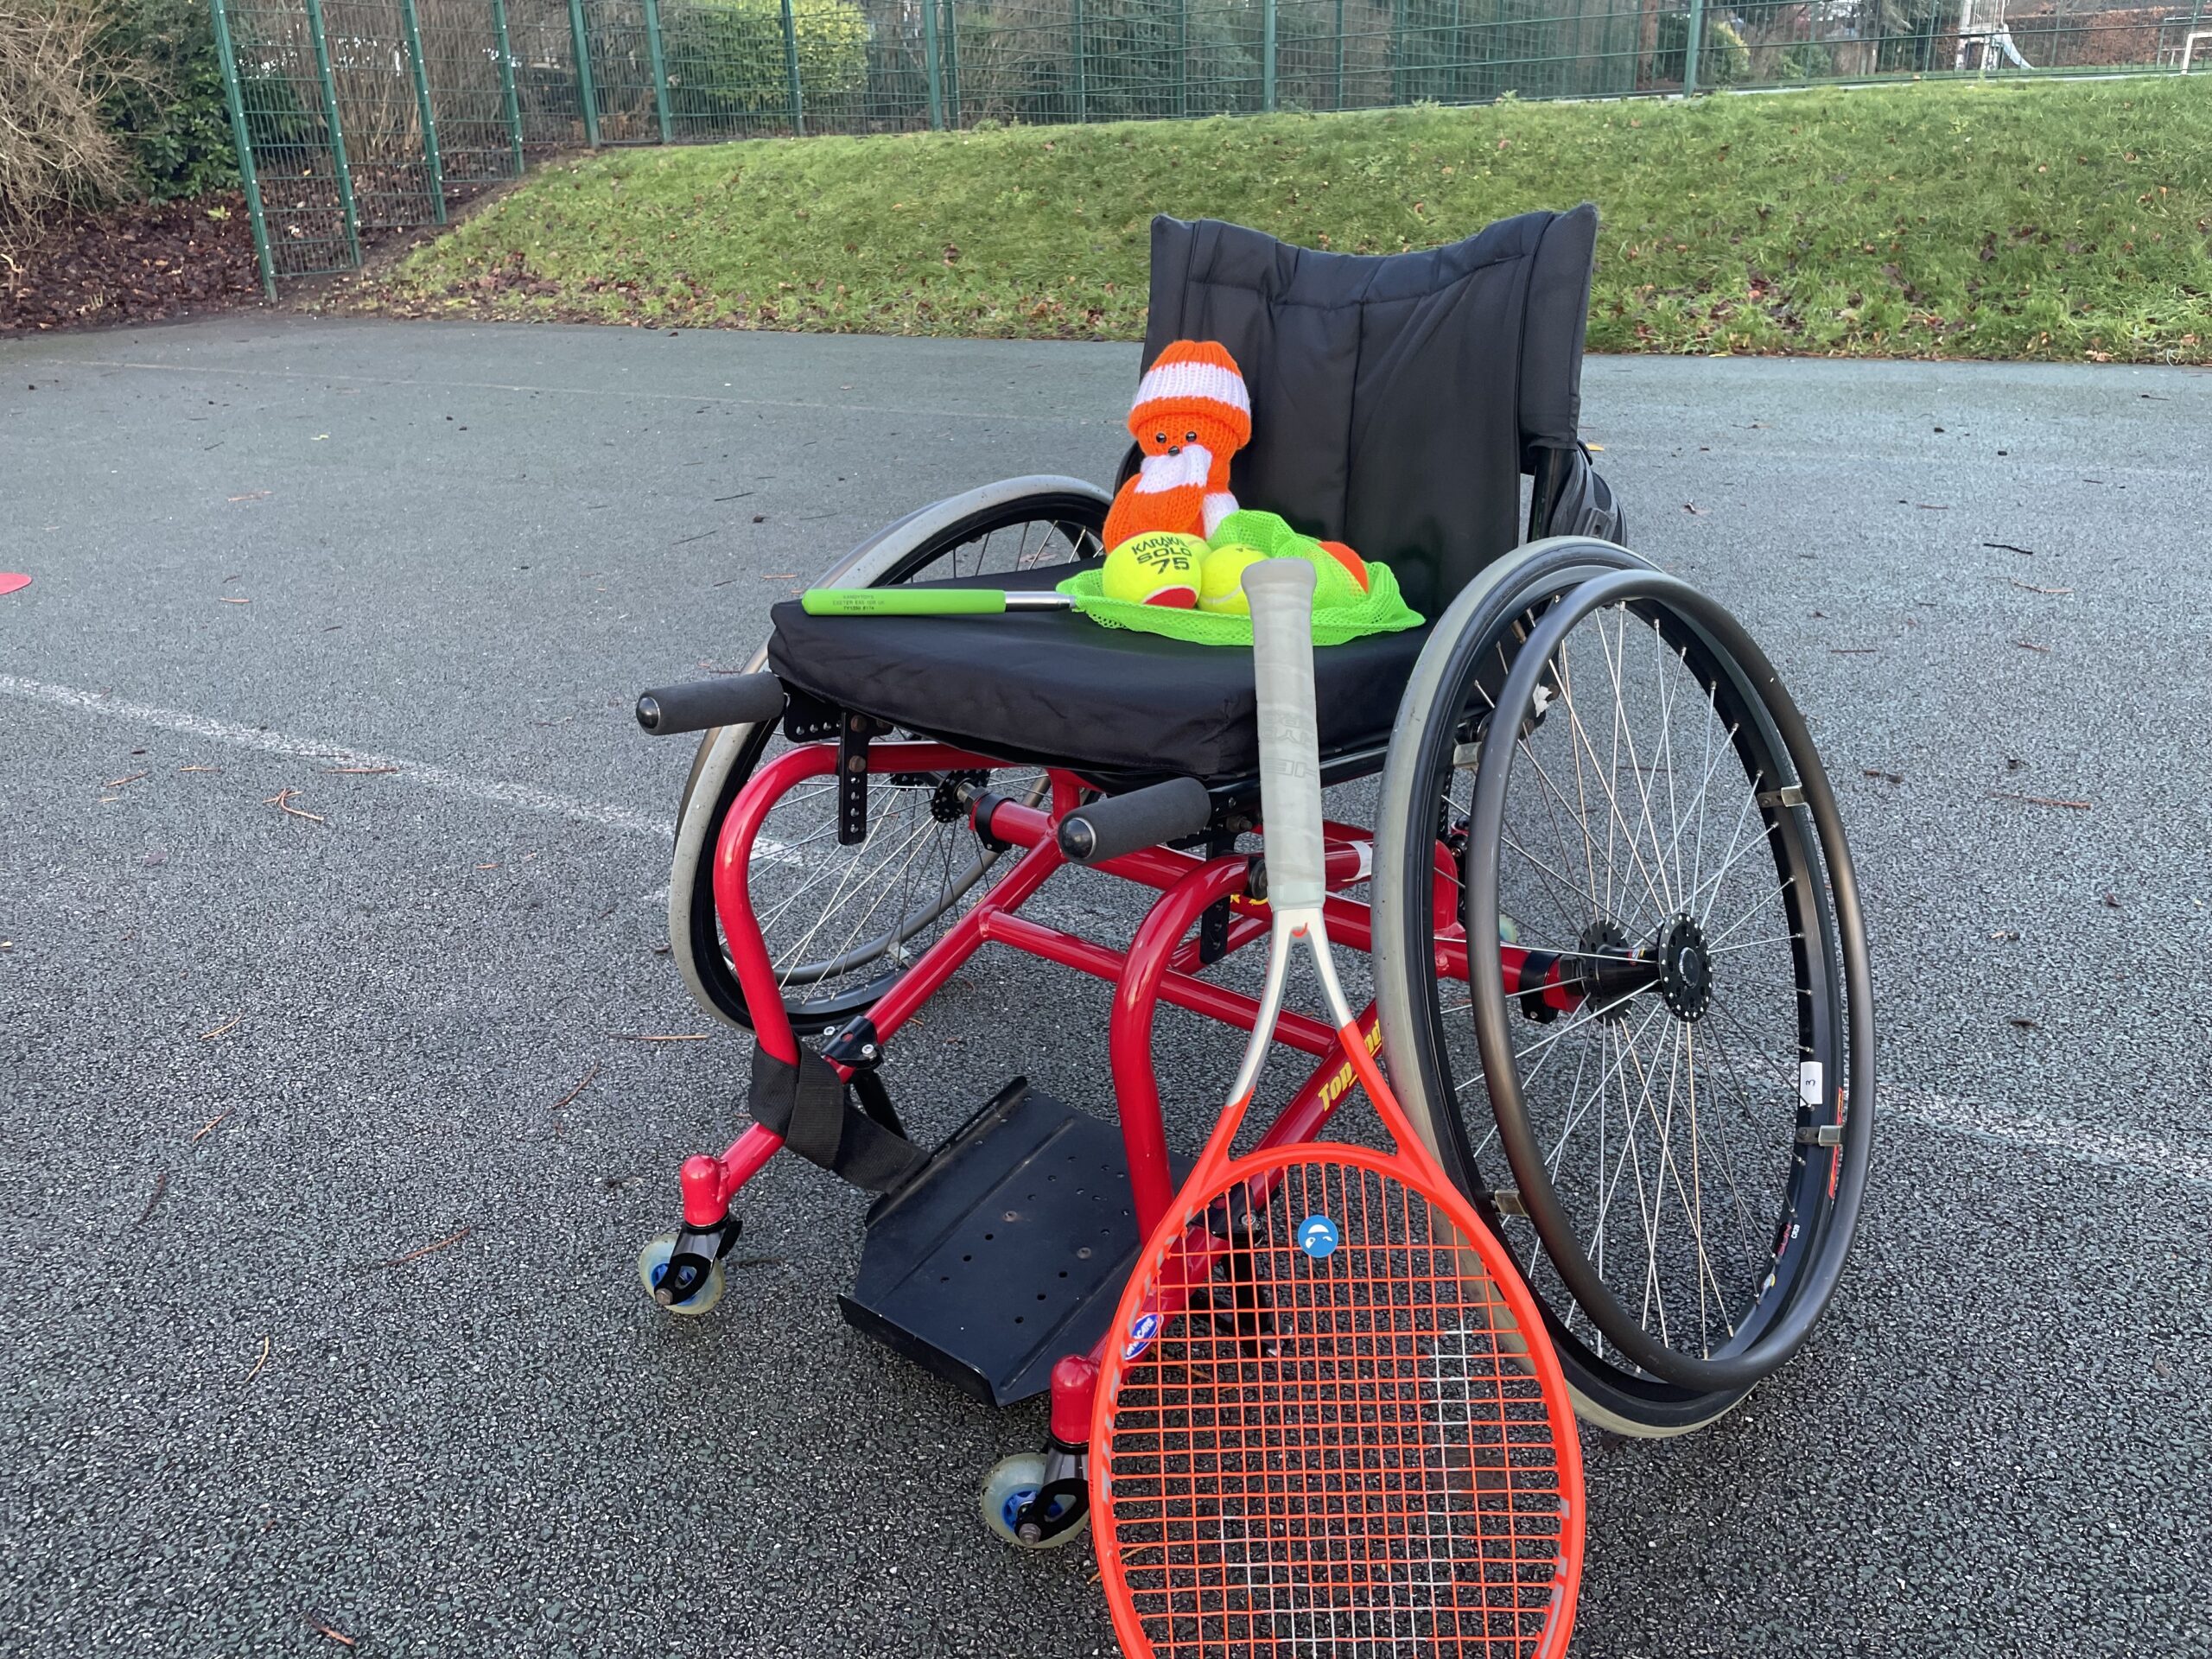 Tango sat on a sports wheelchair with LUSU equipment